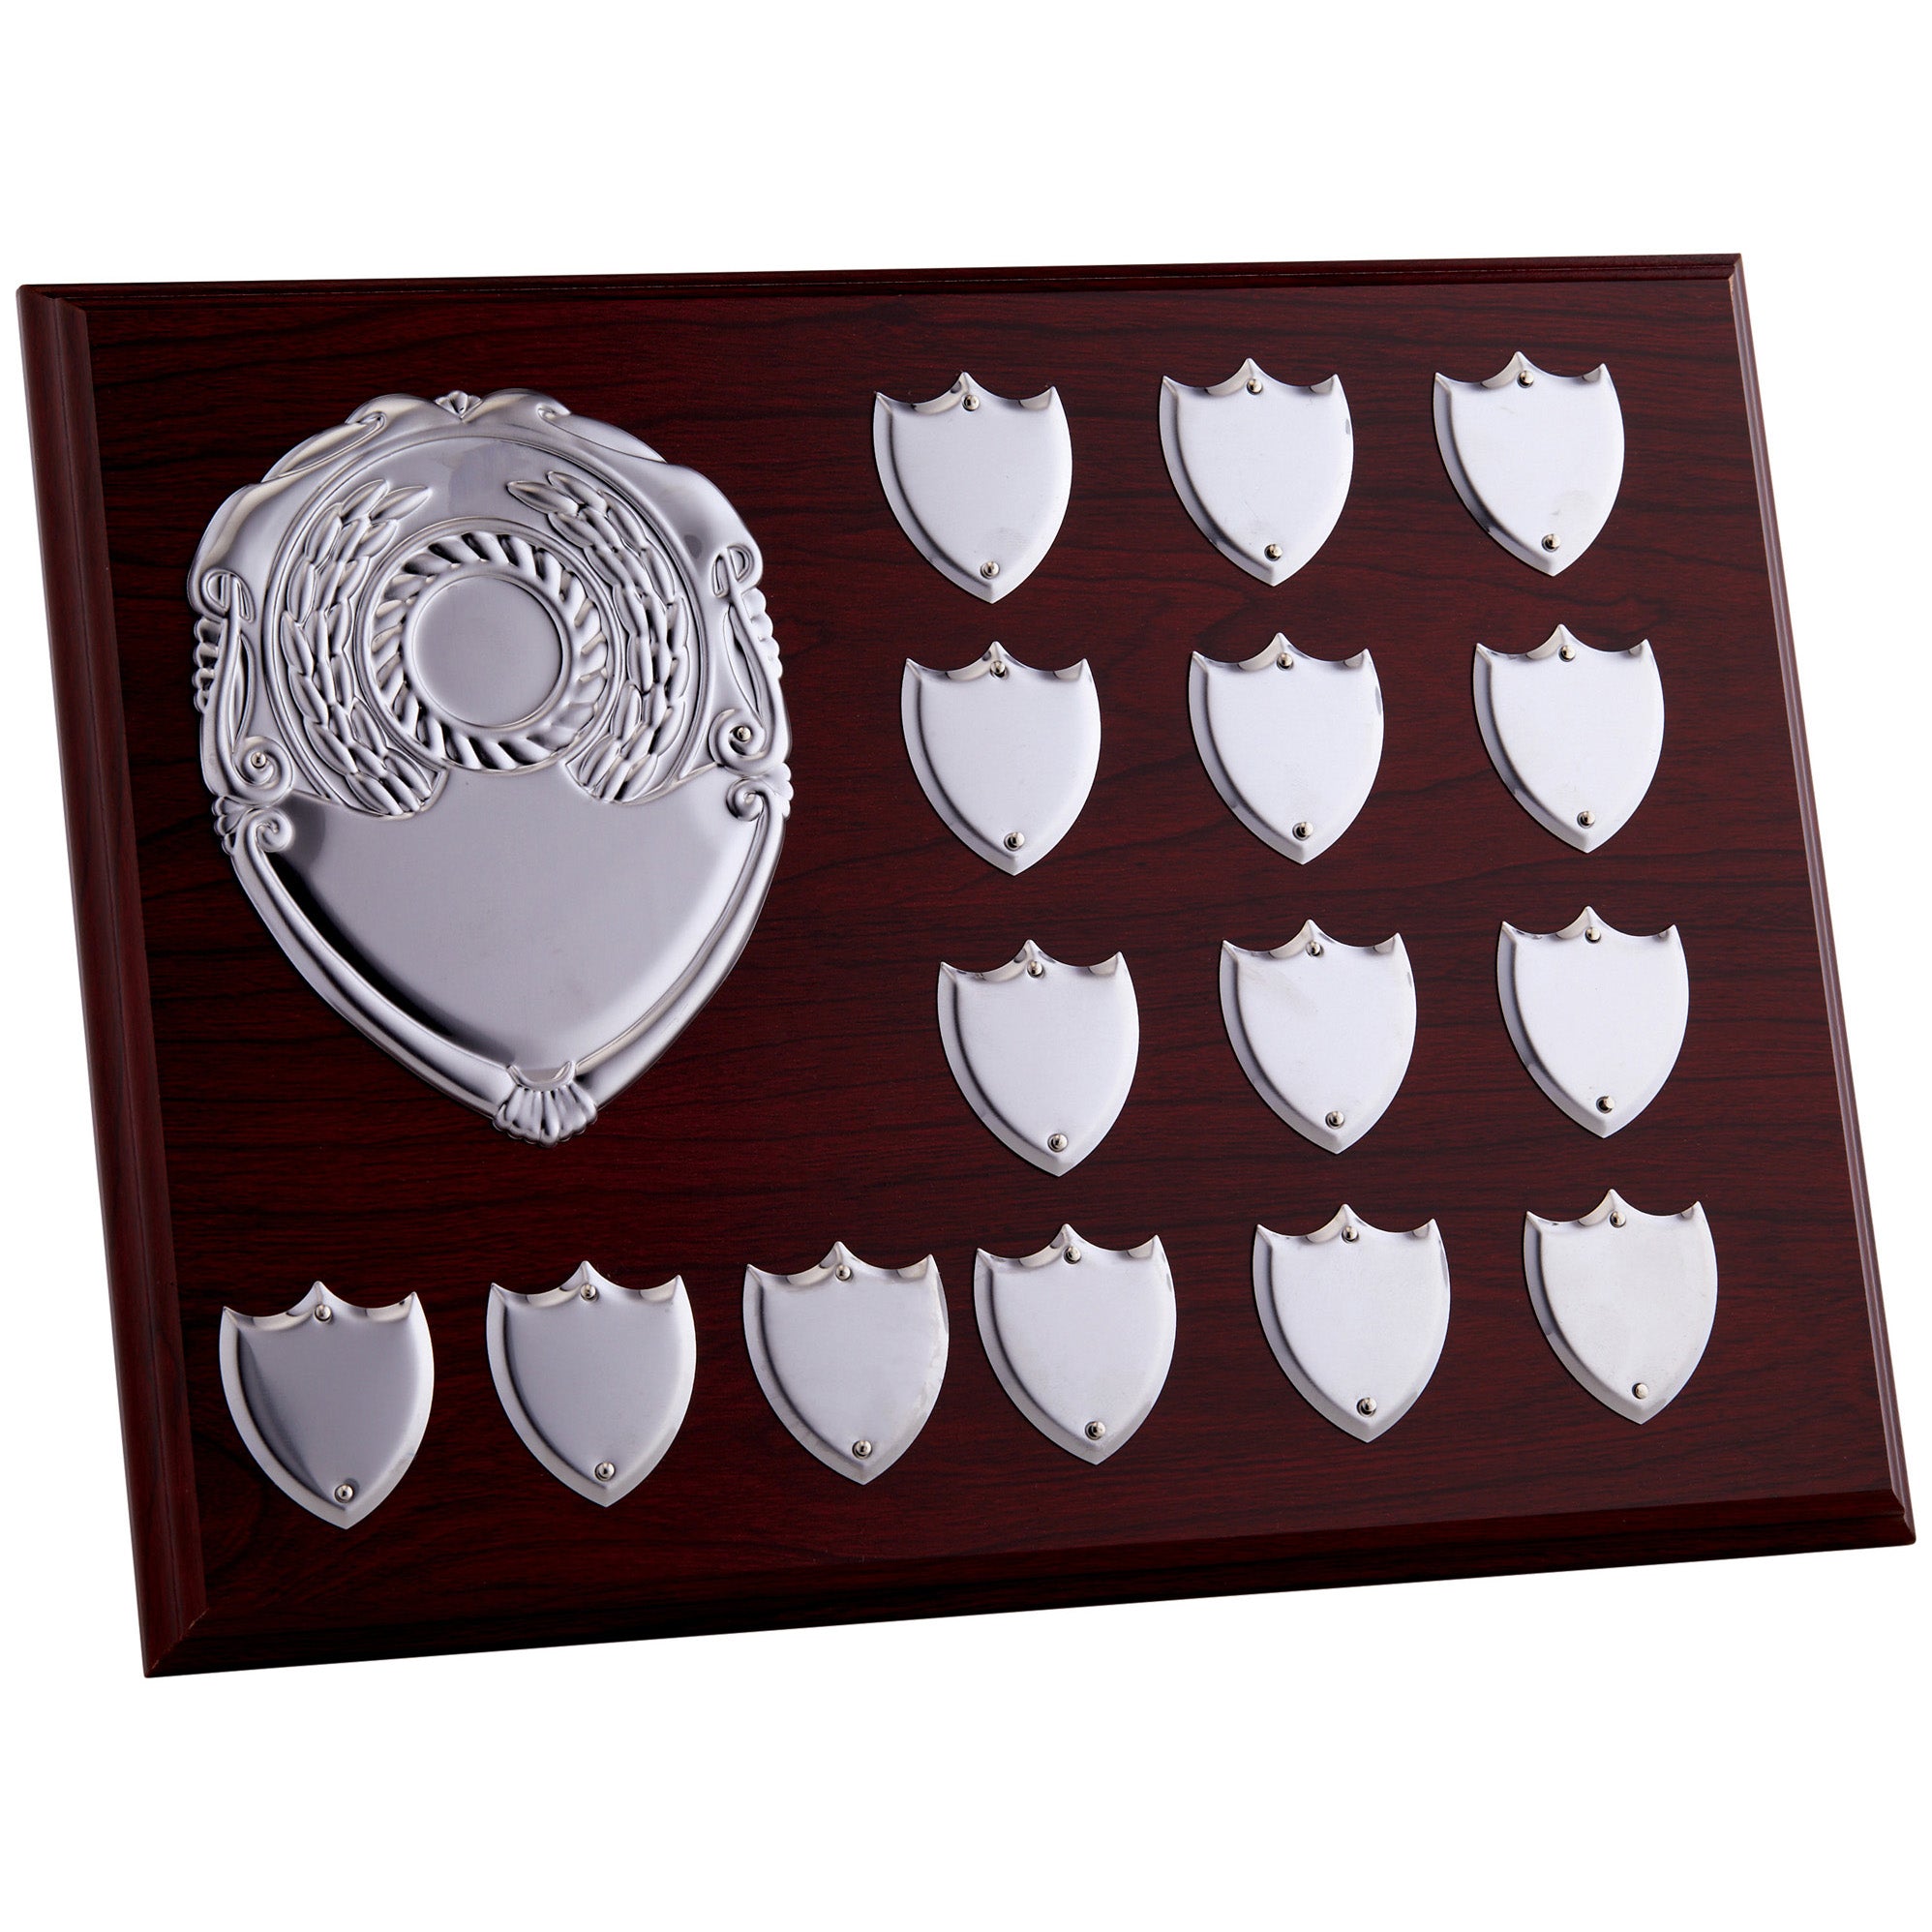 12x9" Wooden Presentation Perpetual Plaque with 15 Mini Shields